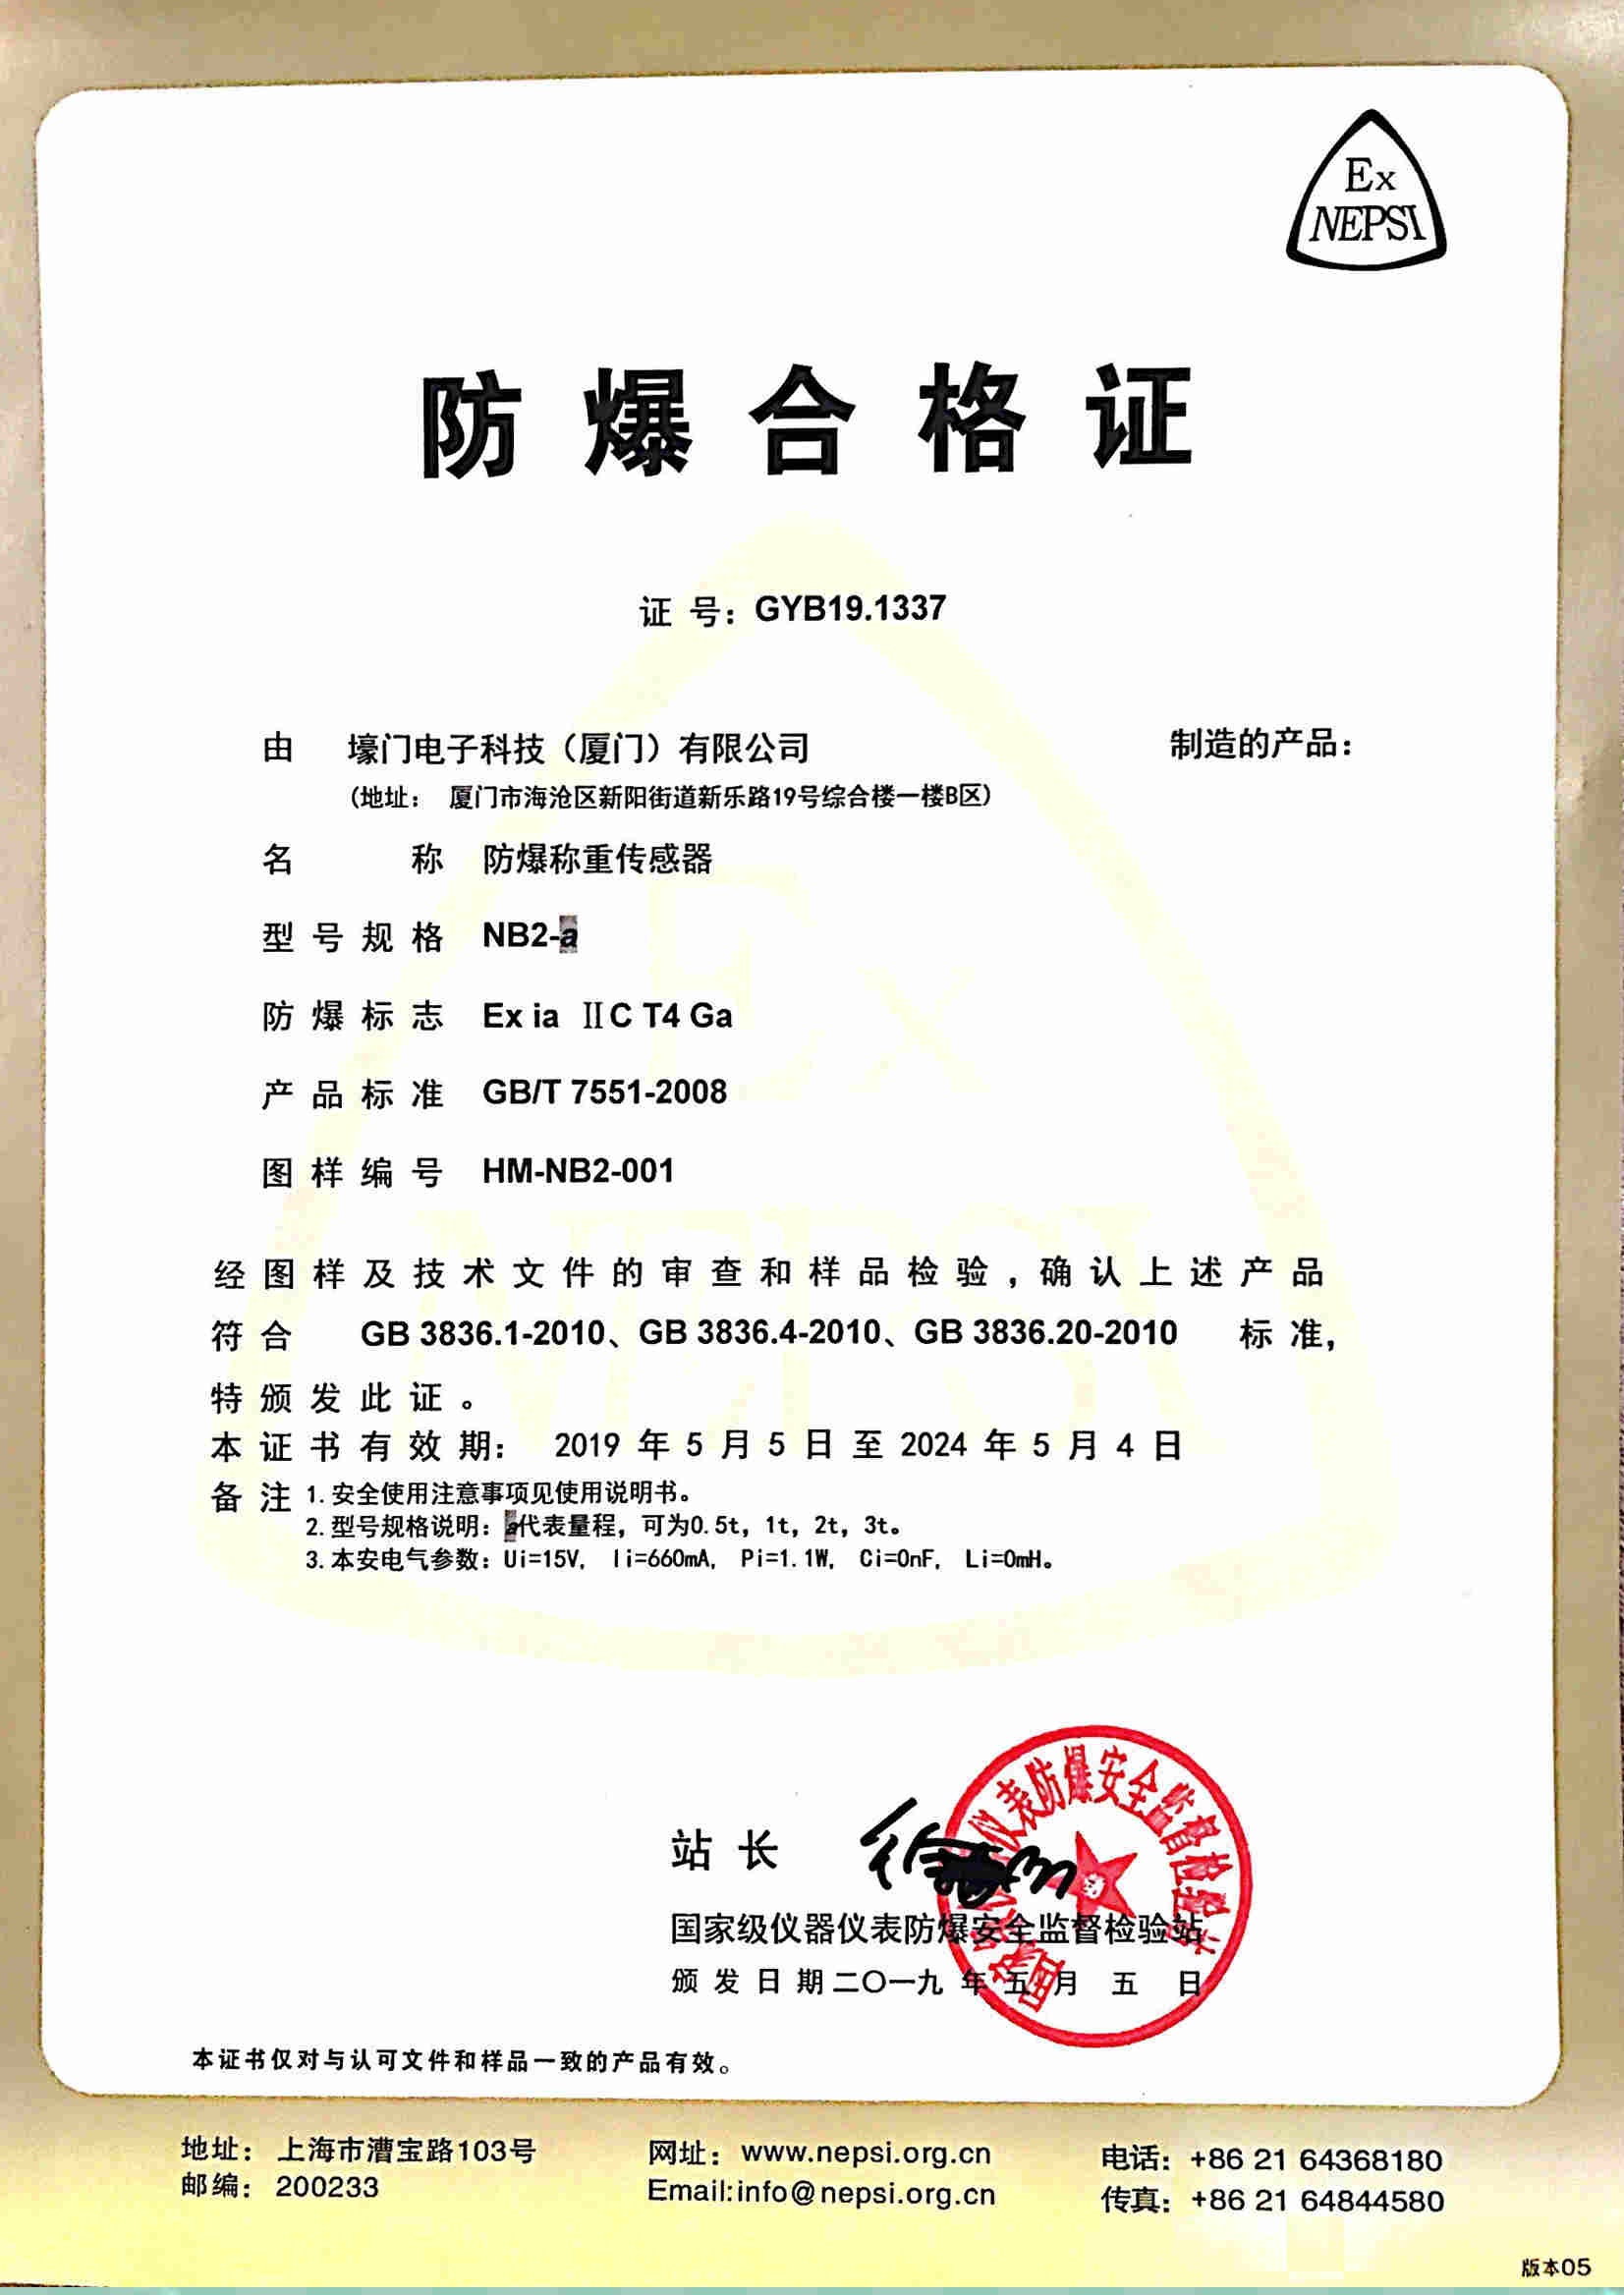 NEPSI approval Explosion Safety Certificate for NB2